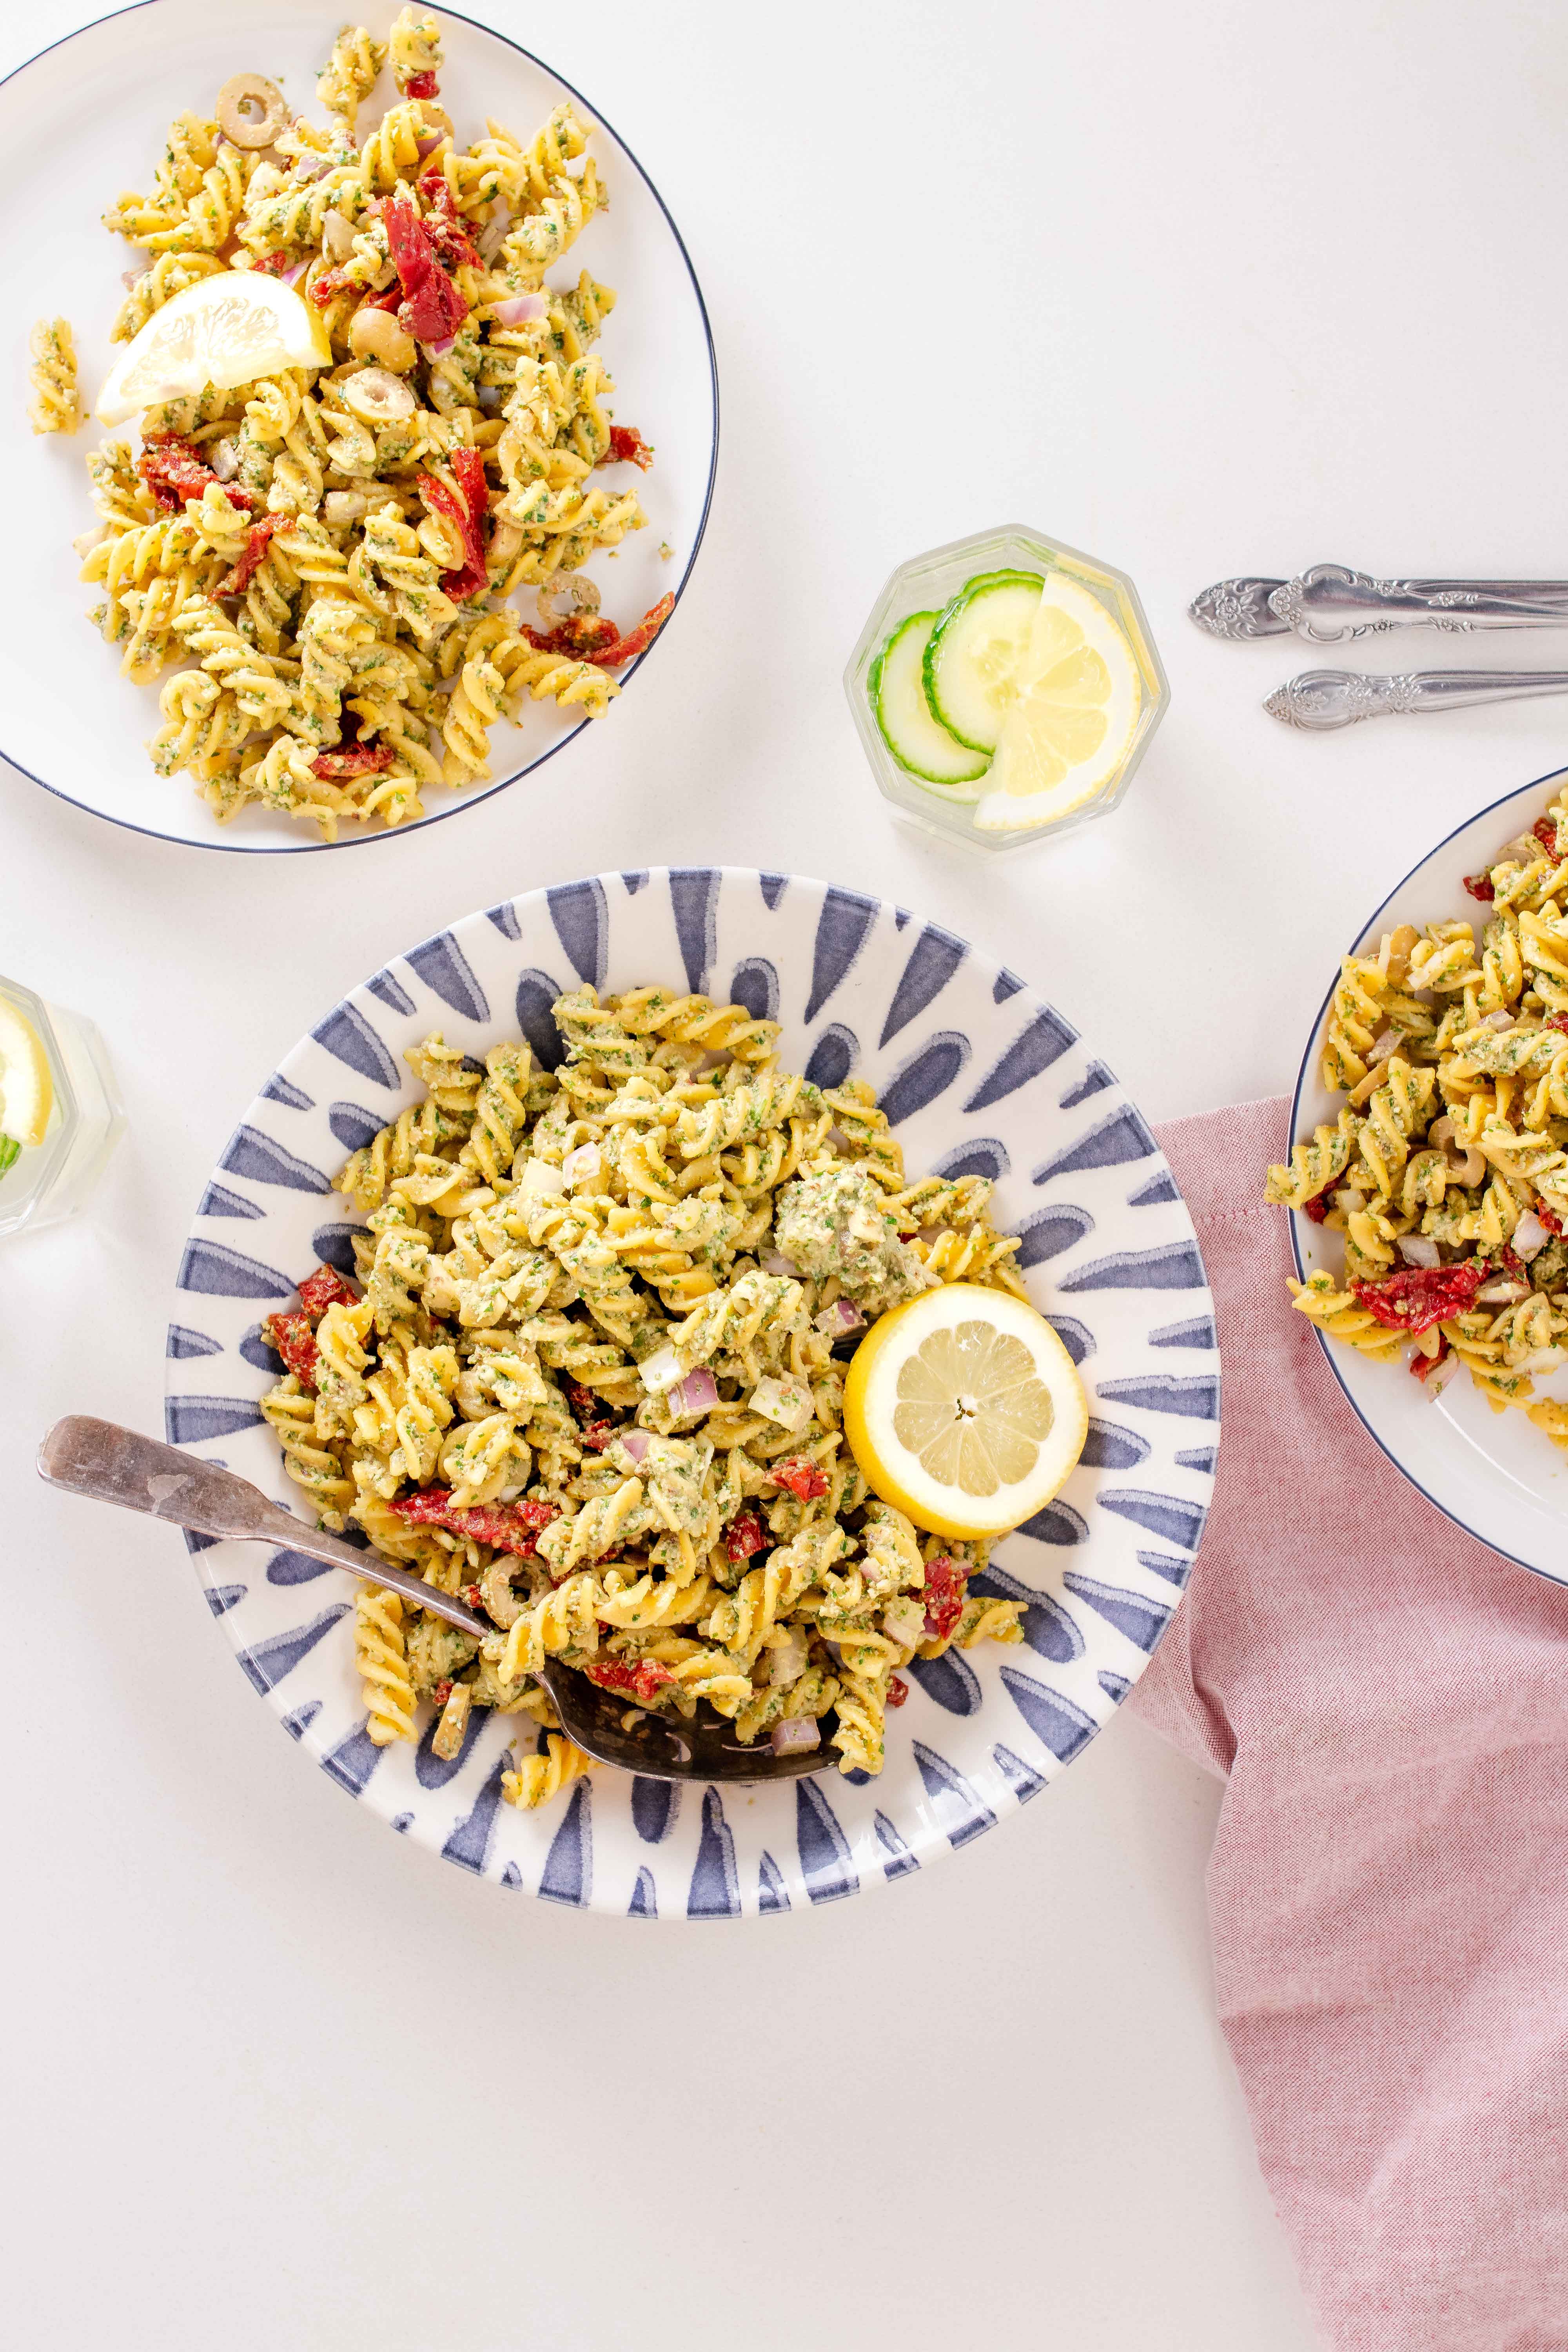 fusilli pasta with pesto, olive, sundried tomatoes, red onion and a lemon slice